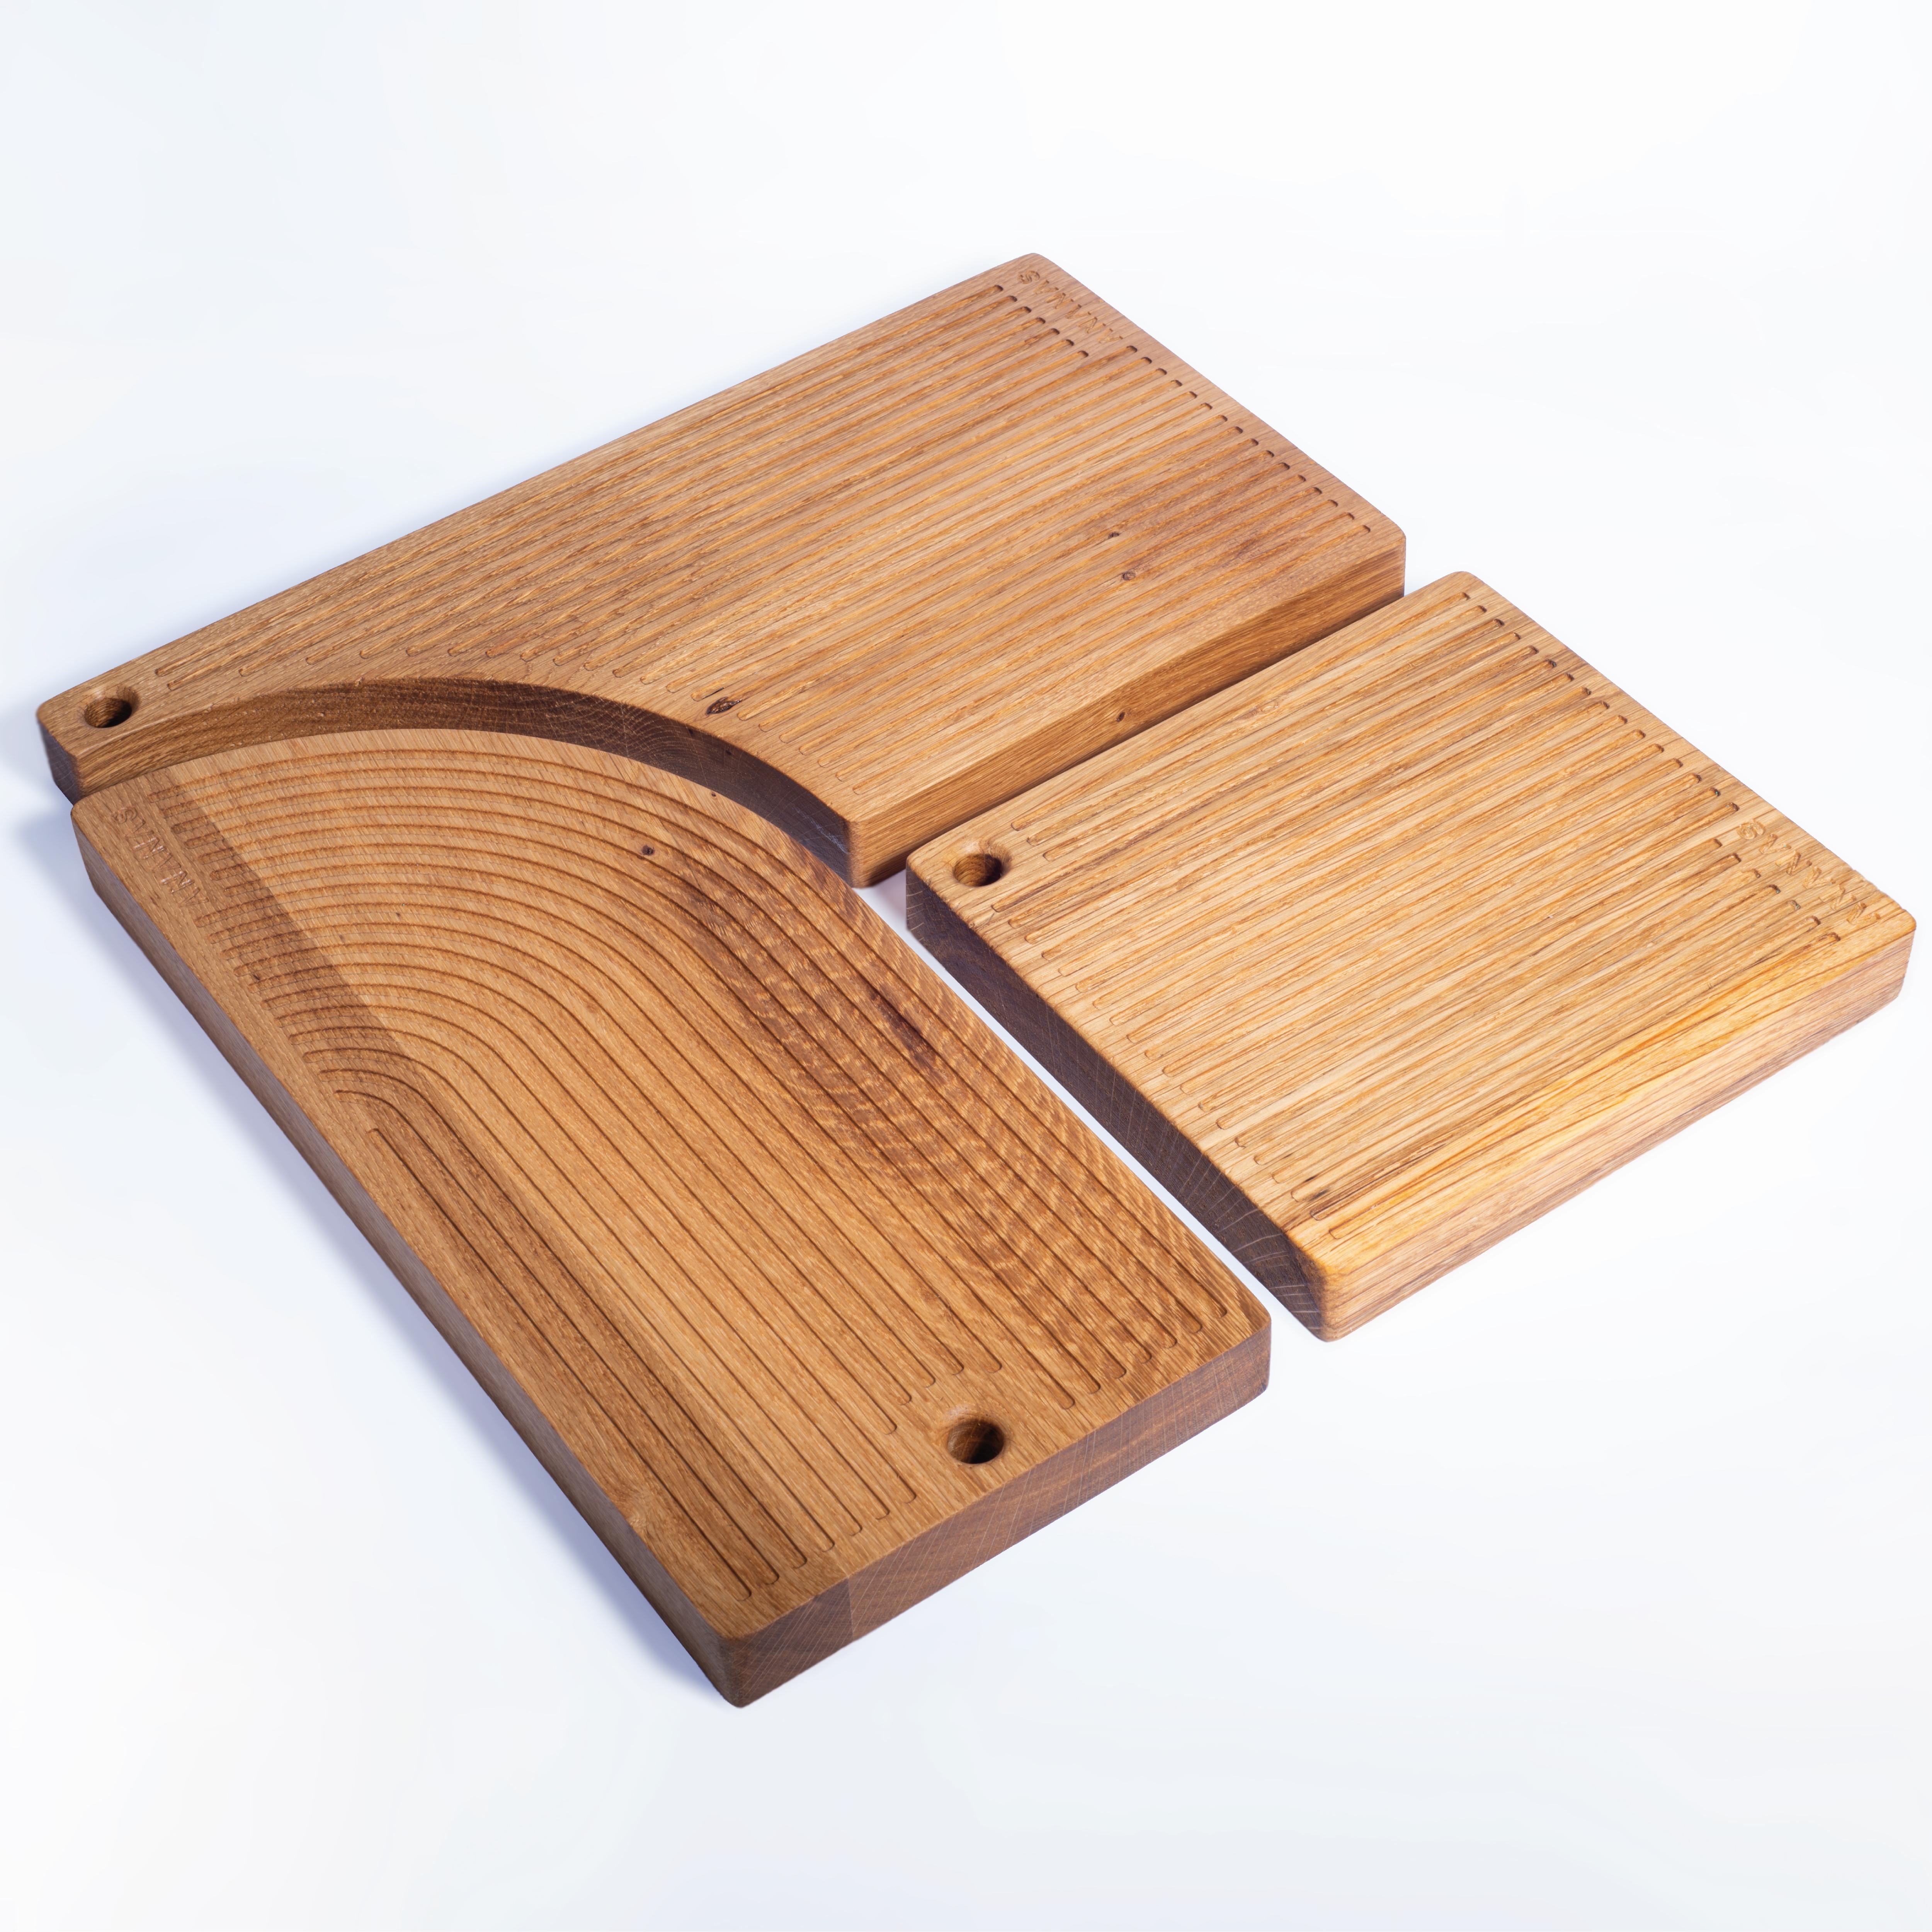 Dada has been designed for service and presentation and is made of solid oak wood. The arrangement of the grooves on their surface prevents the juices of food from dripping. They are ideal for the presentation of fish, cheese, and meat on your